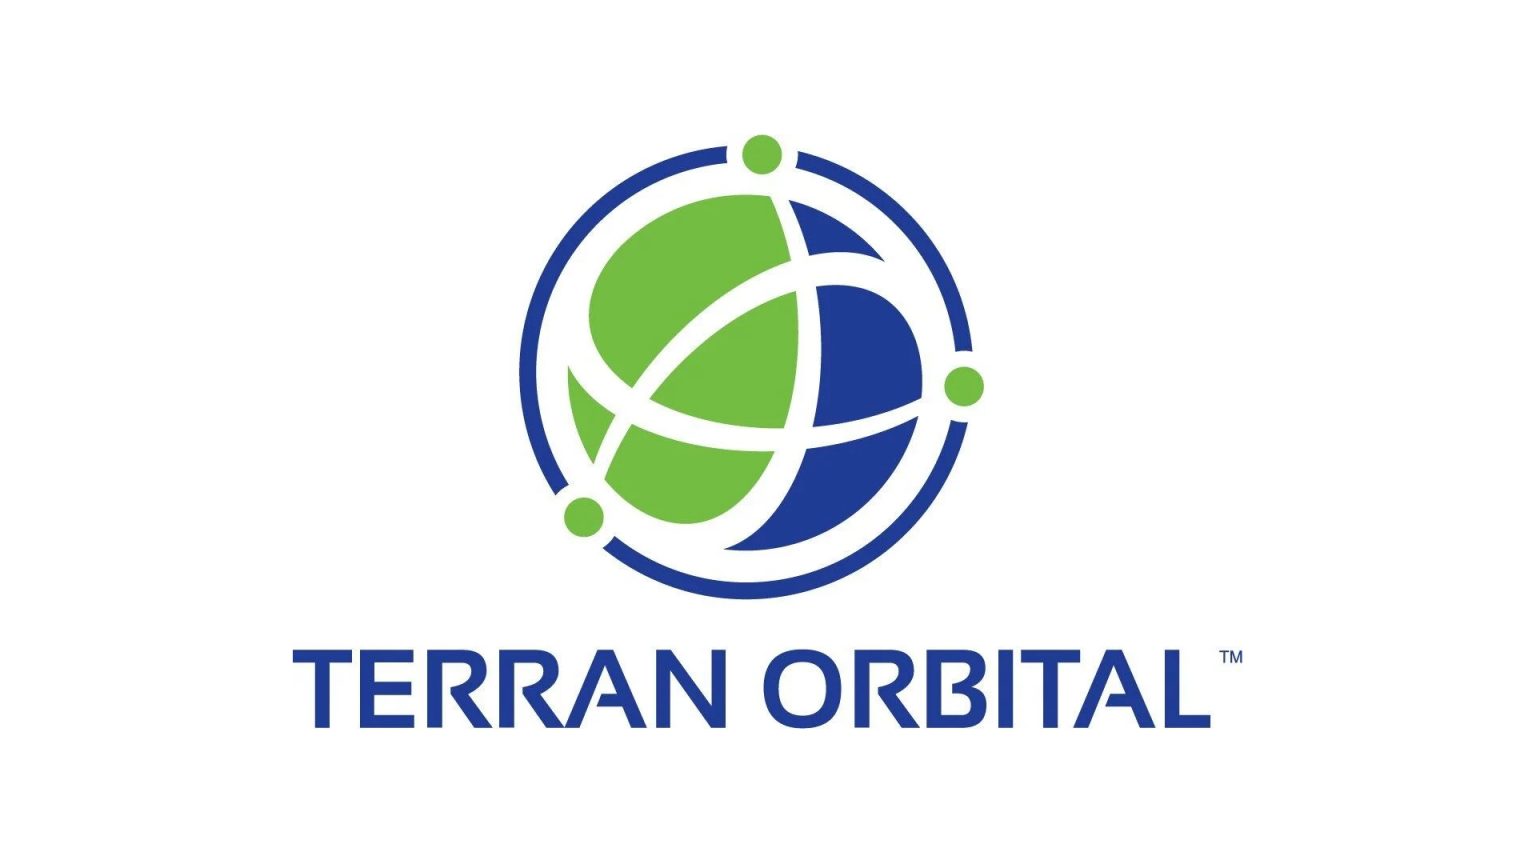 Terran Orbital Receives Major Payment From Rivada Space, Boosts Year-End Cash Balance